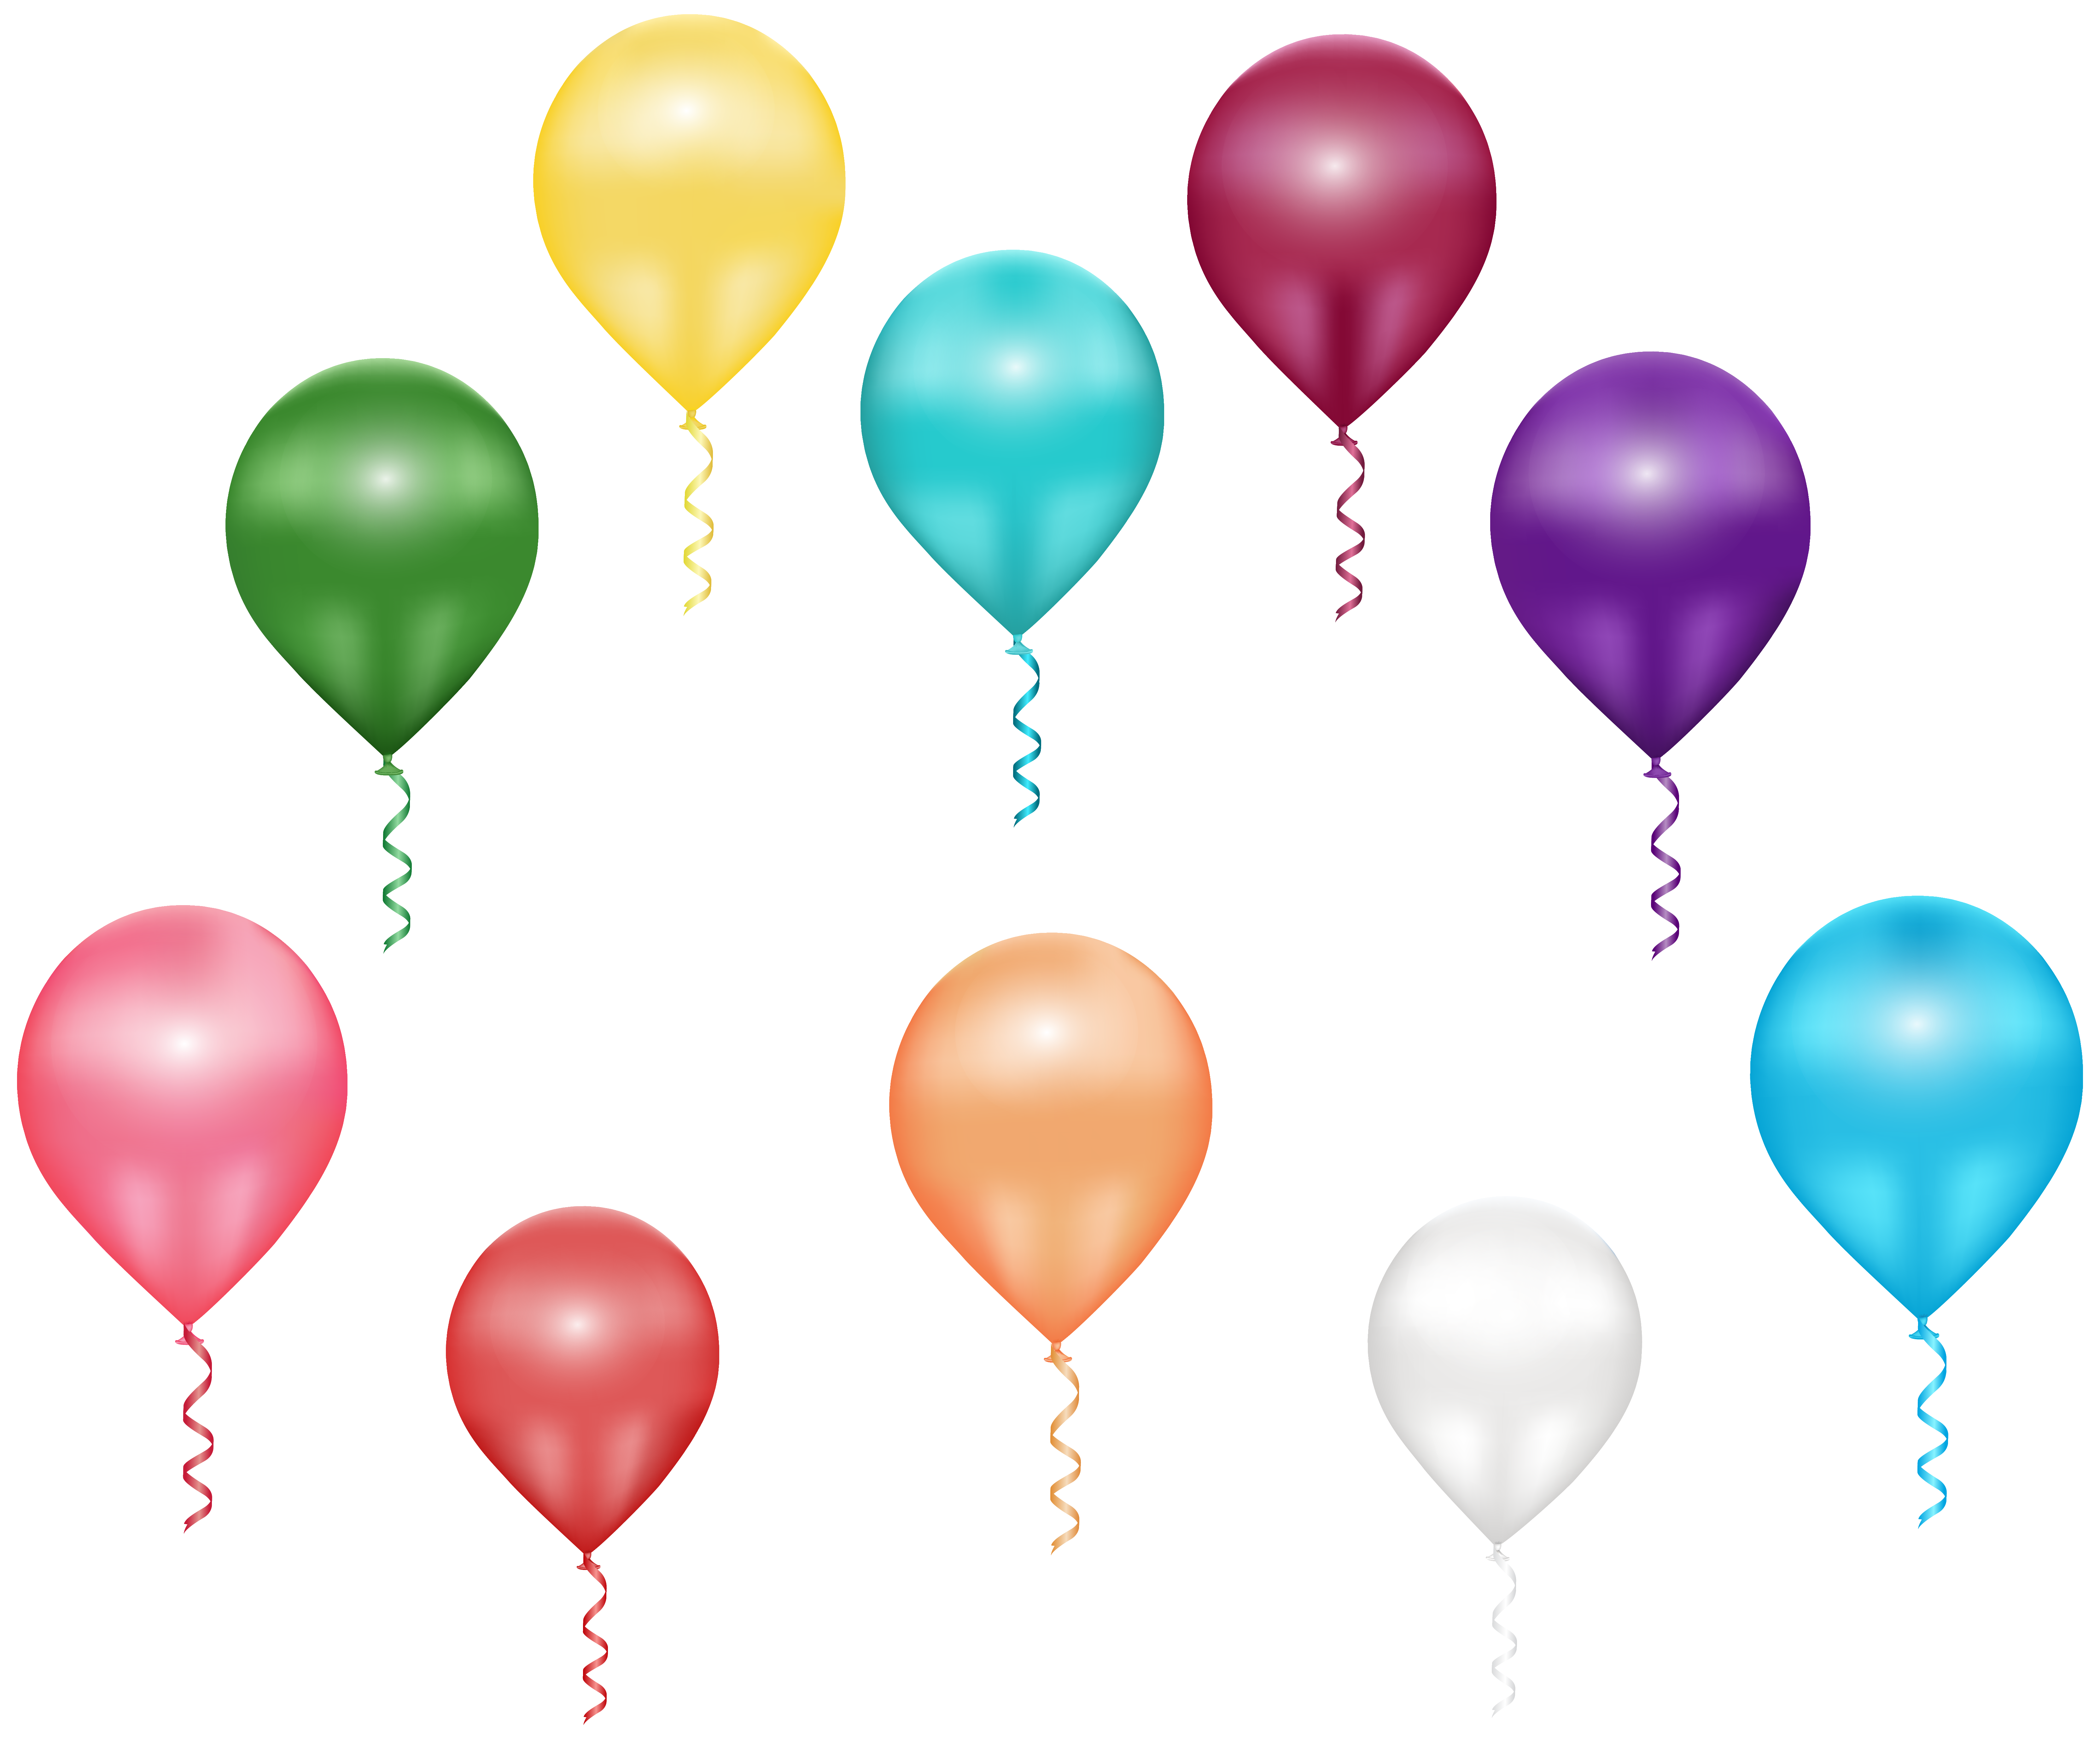 Flying Balloons PNG Clip Art Image | Gallery Yopriceville - High ...